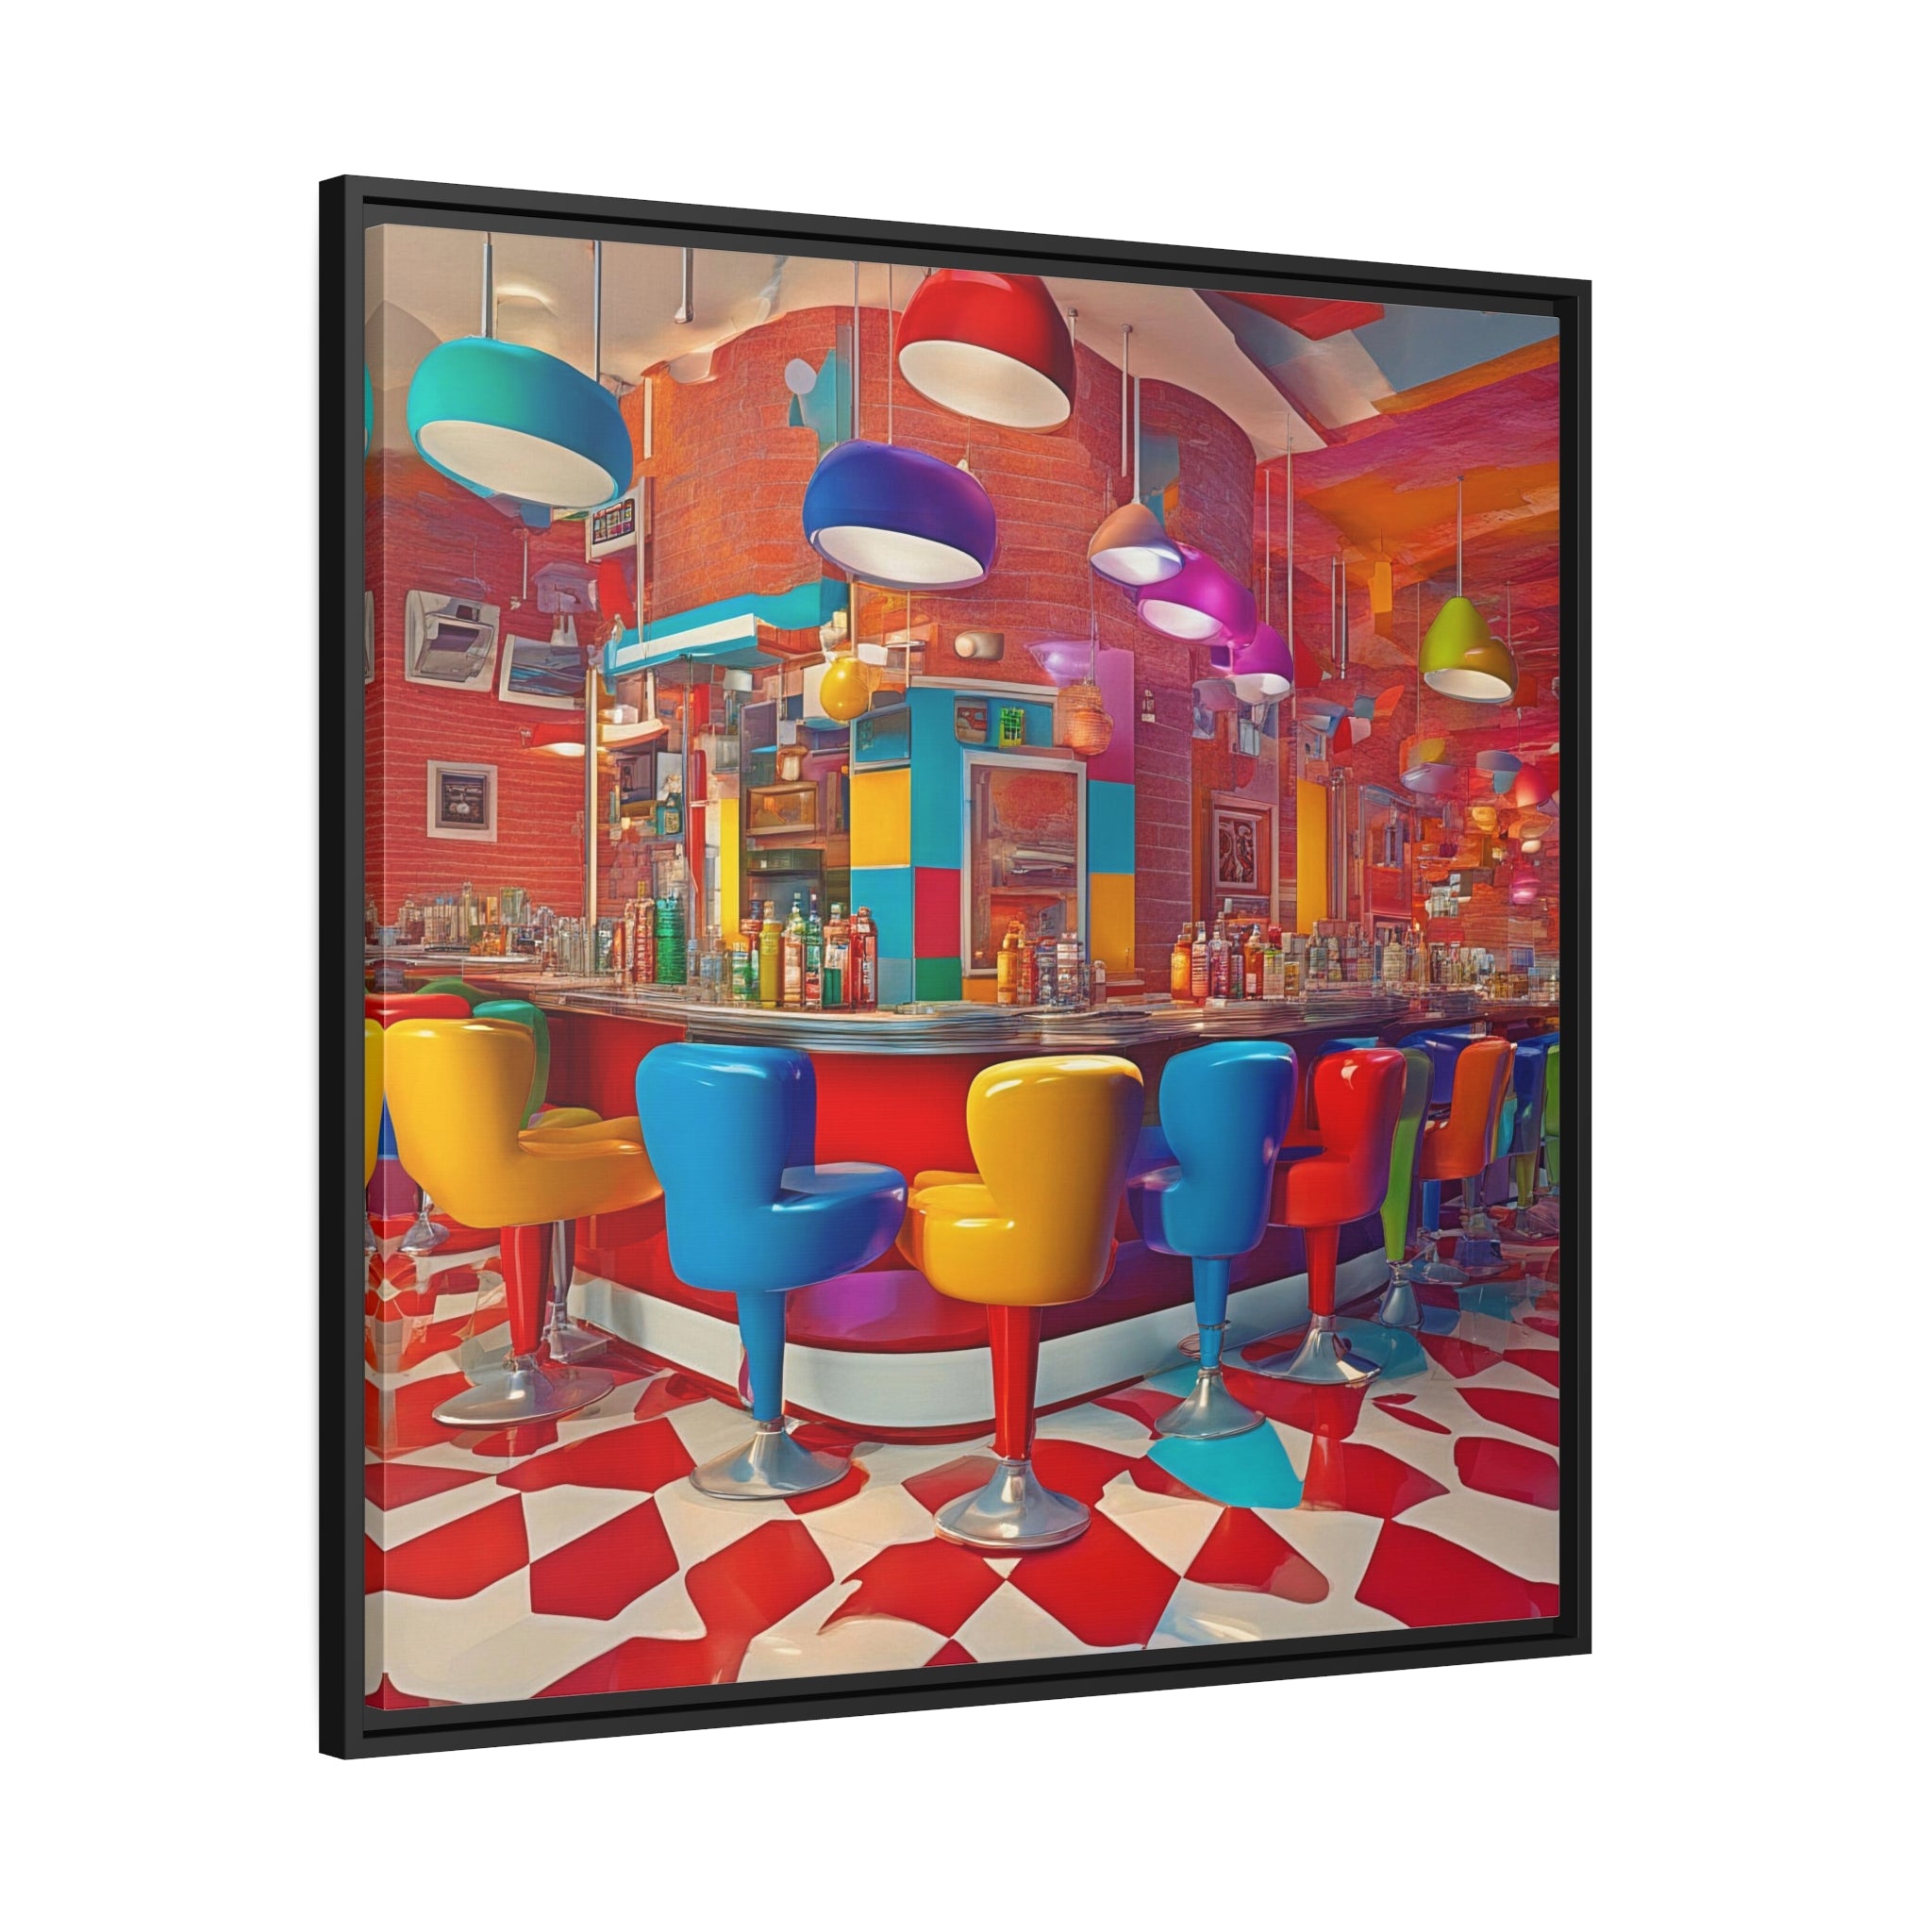 Wall Art DINER Canvas Print Painting Giclee 32x32 + Frame Love Pop Art Beauty Fun Design House Home Office Decor Gift Ready to Hang